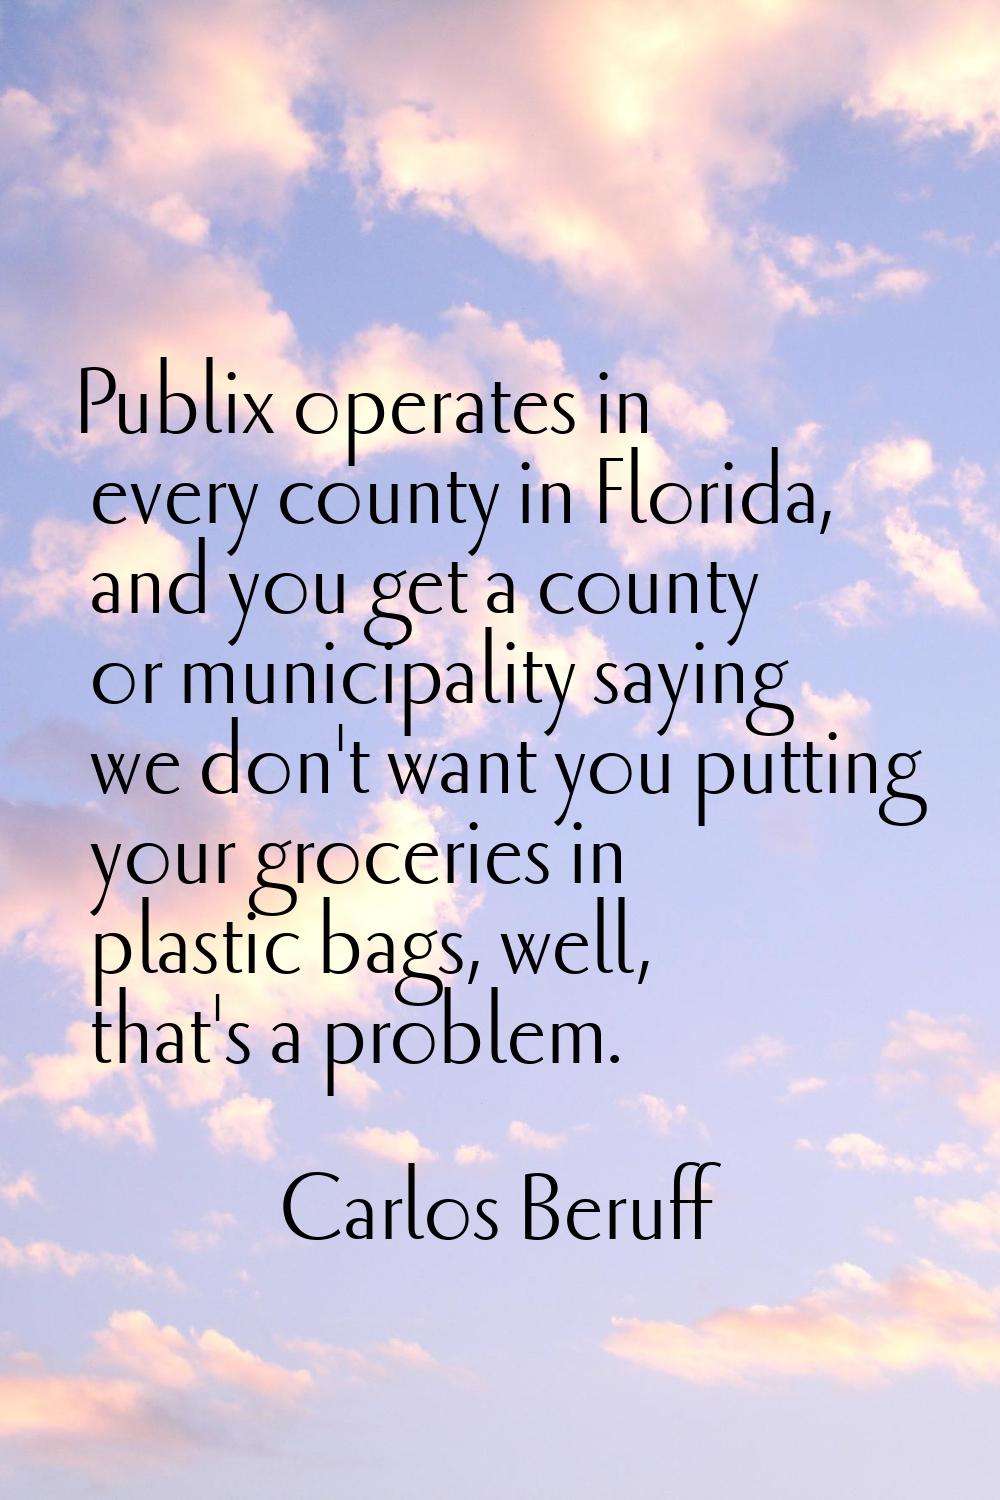 Publix operates in every county in Florida, and you get a county or municipality saying we don't wa